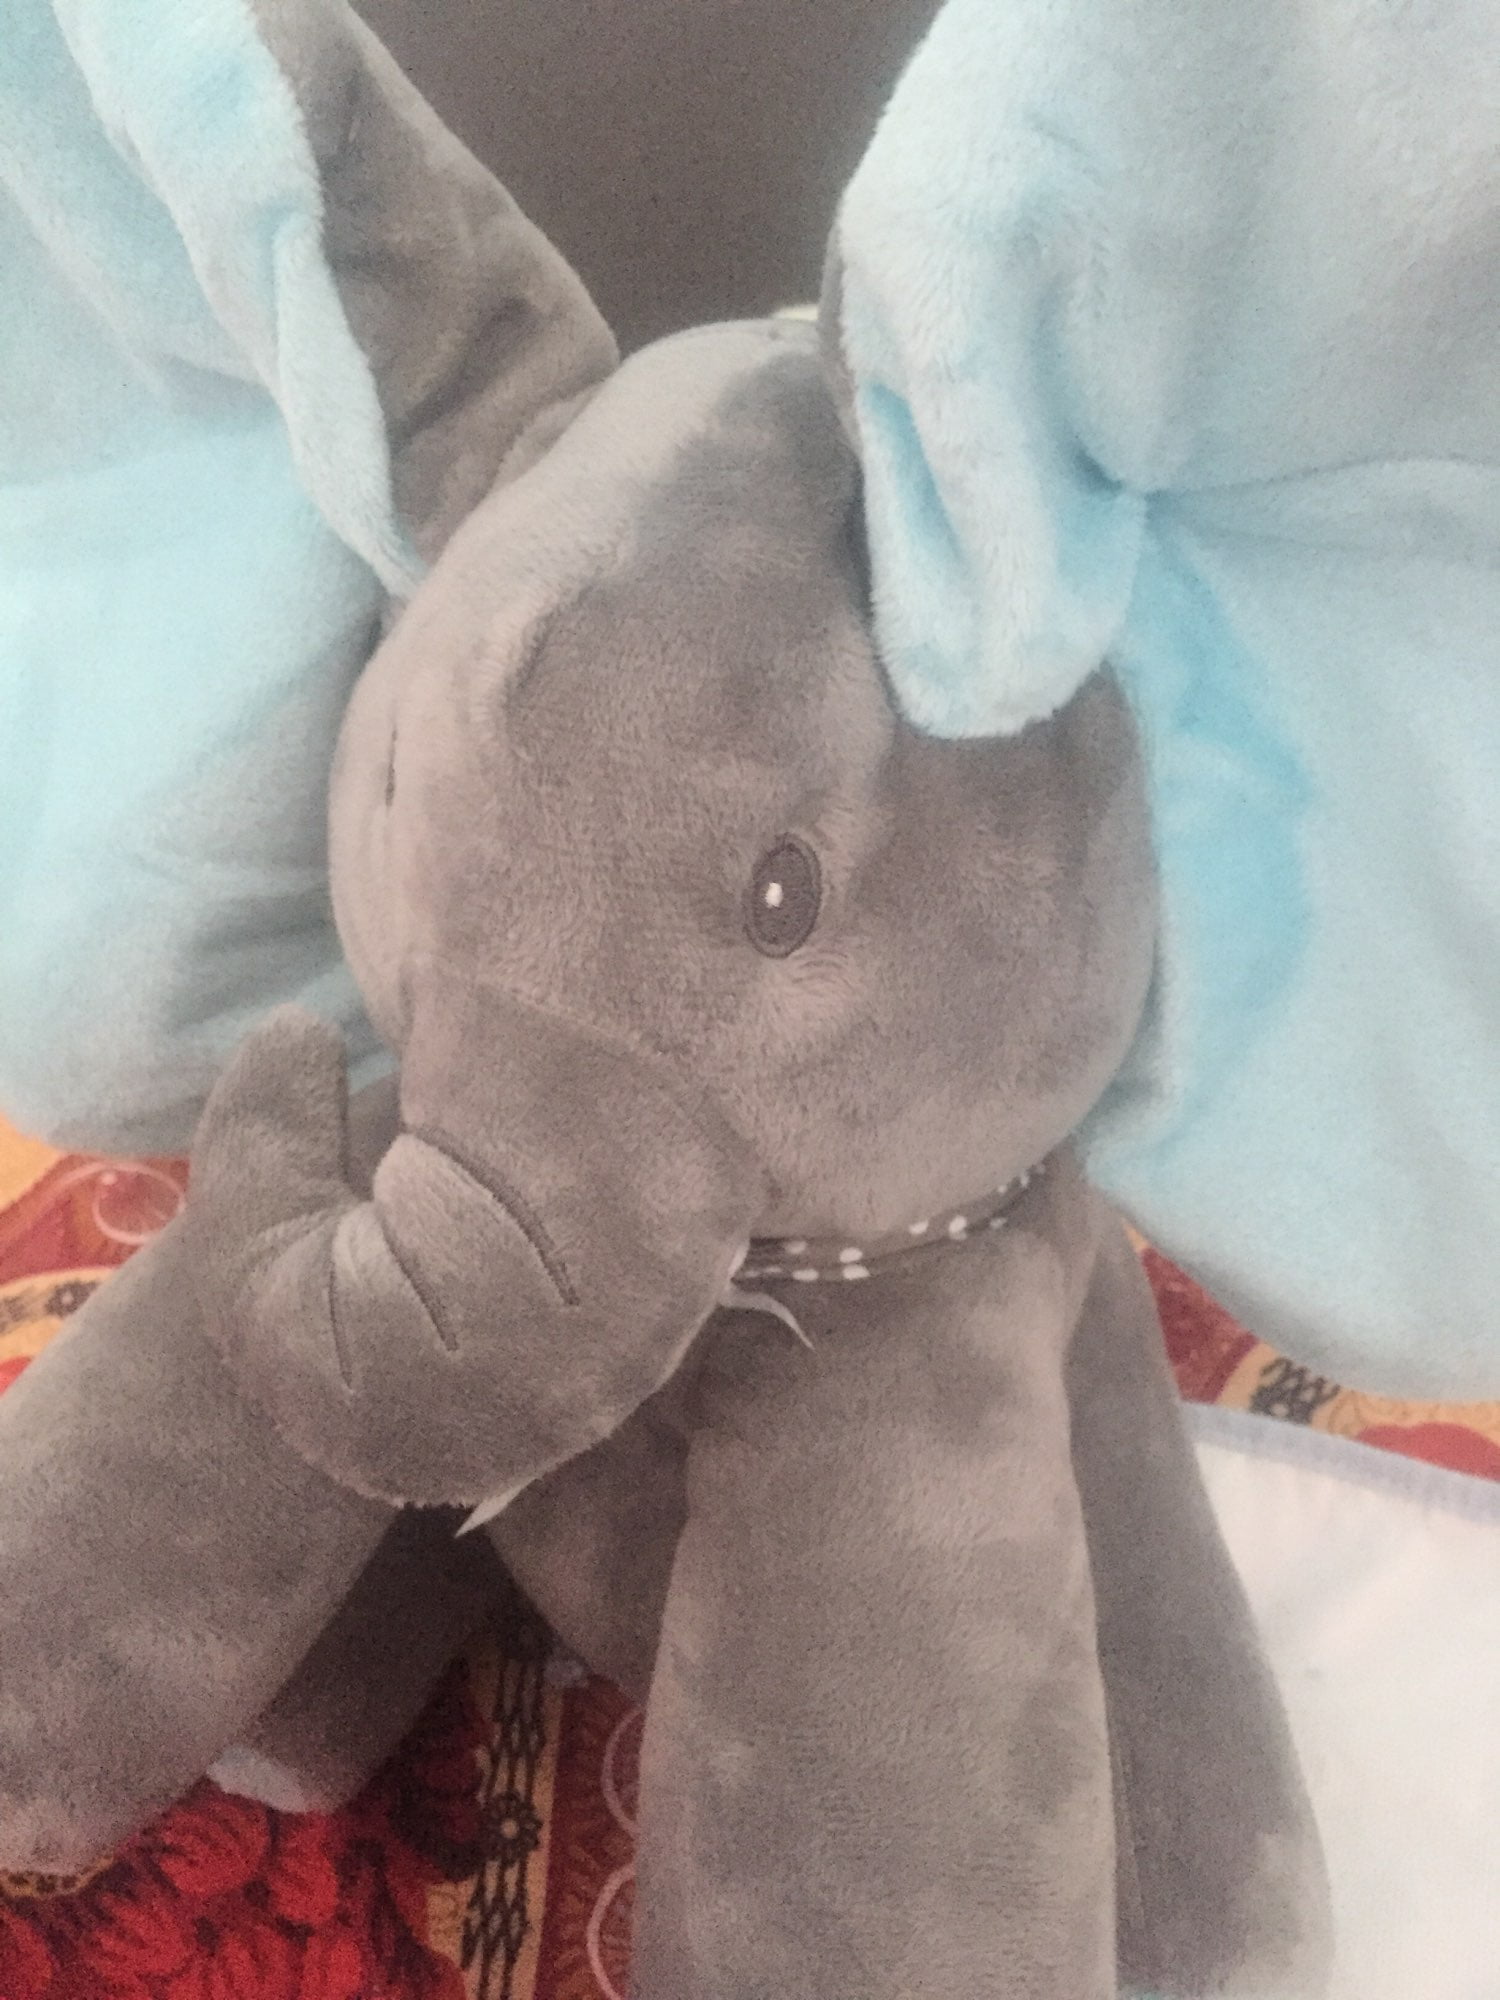 Baby Peek-A-Boo Singing Elephant Plush Toy Educational Electric photo review